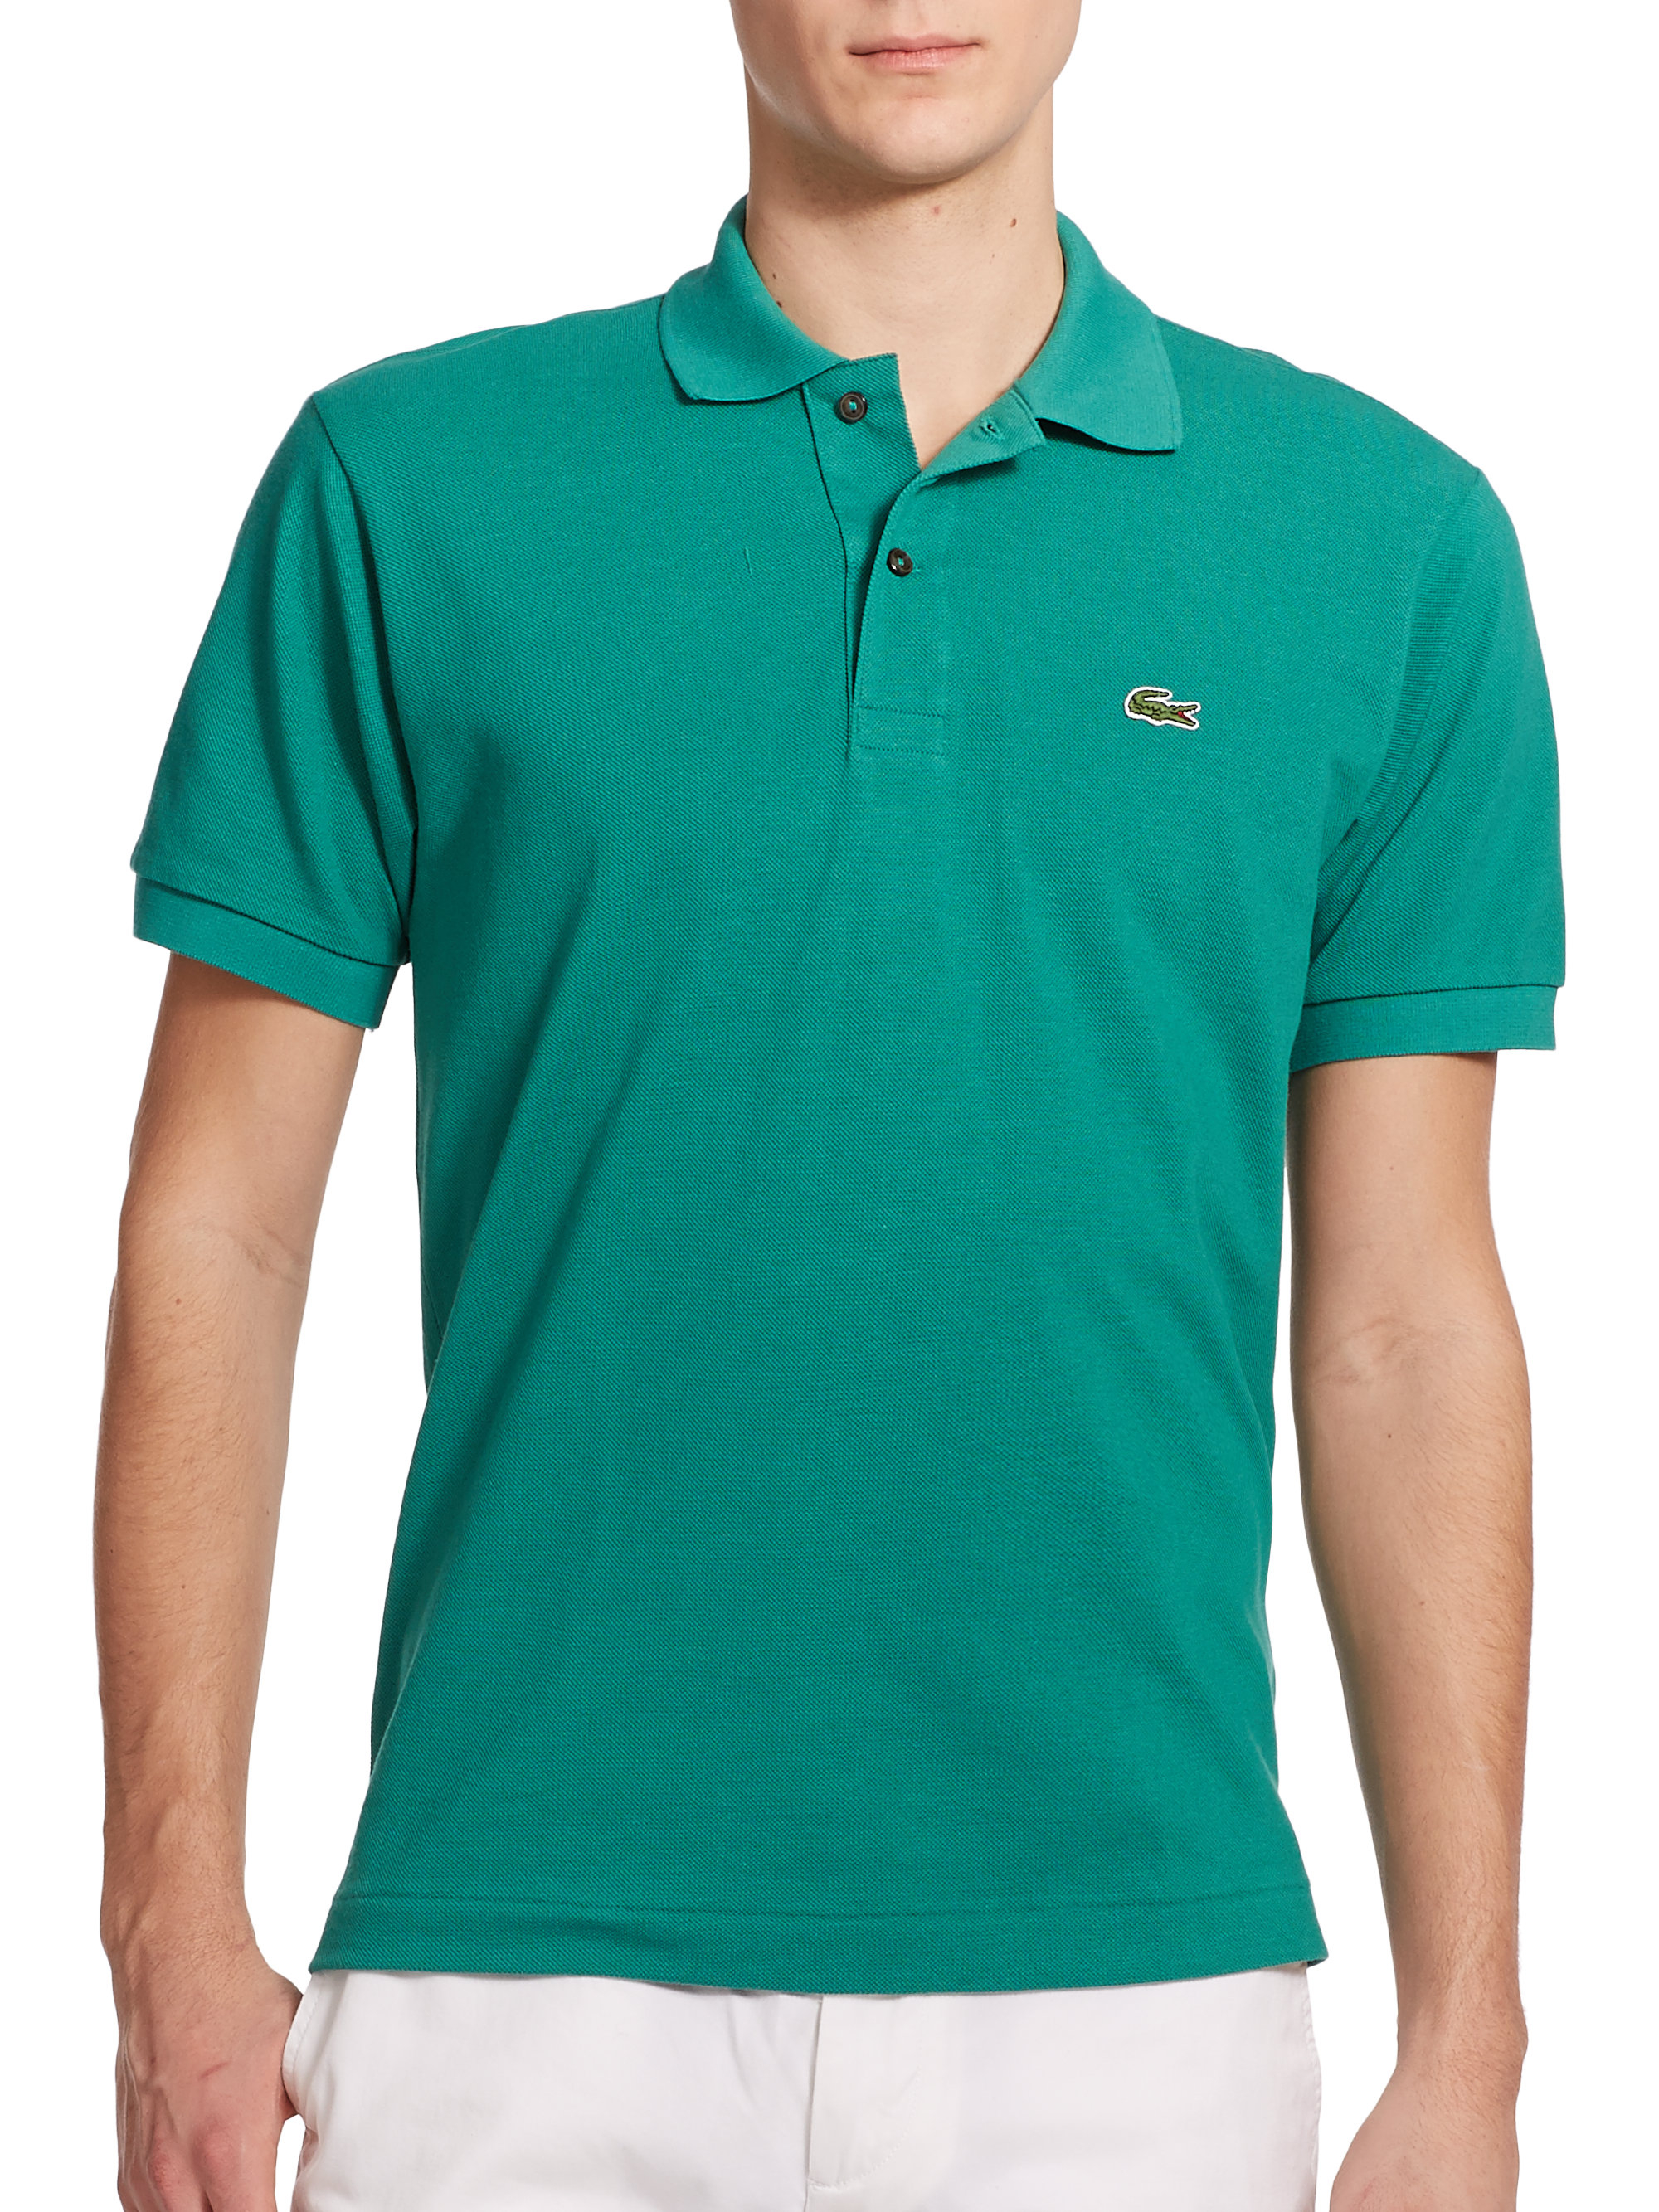 Lacoste Polo Shirt in Green for Men - Lyst